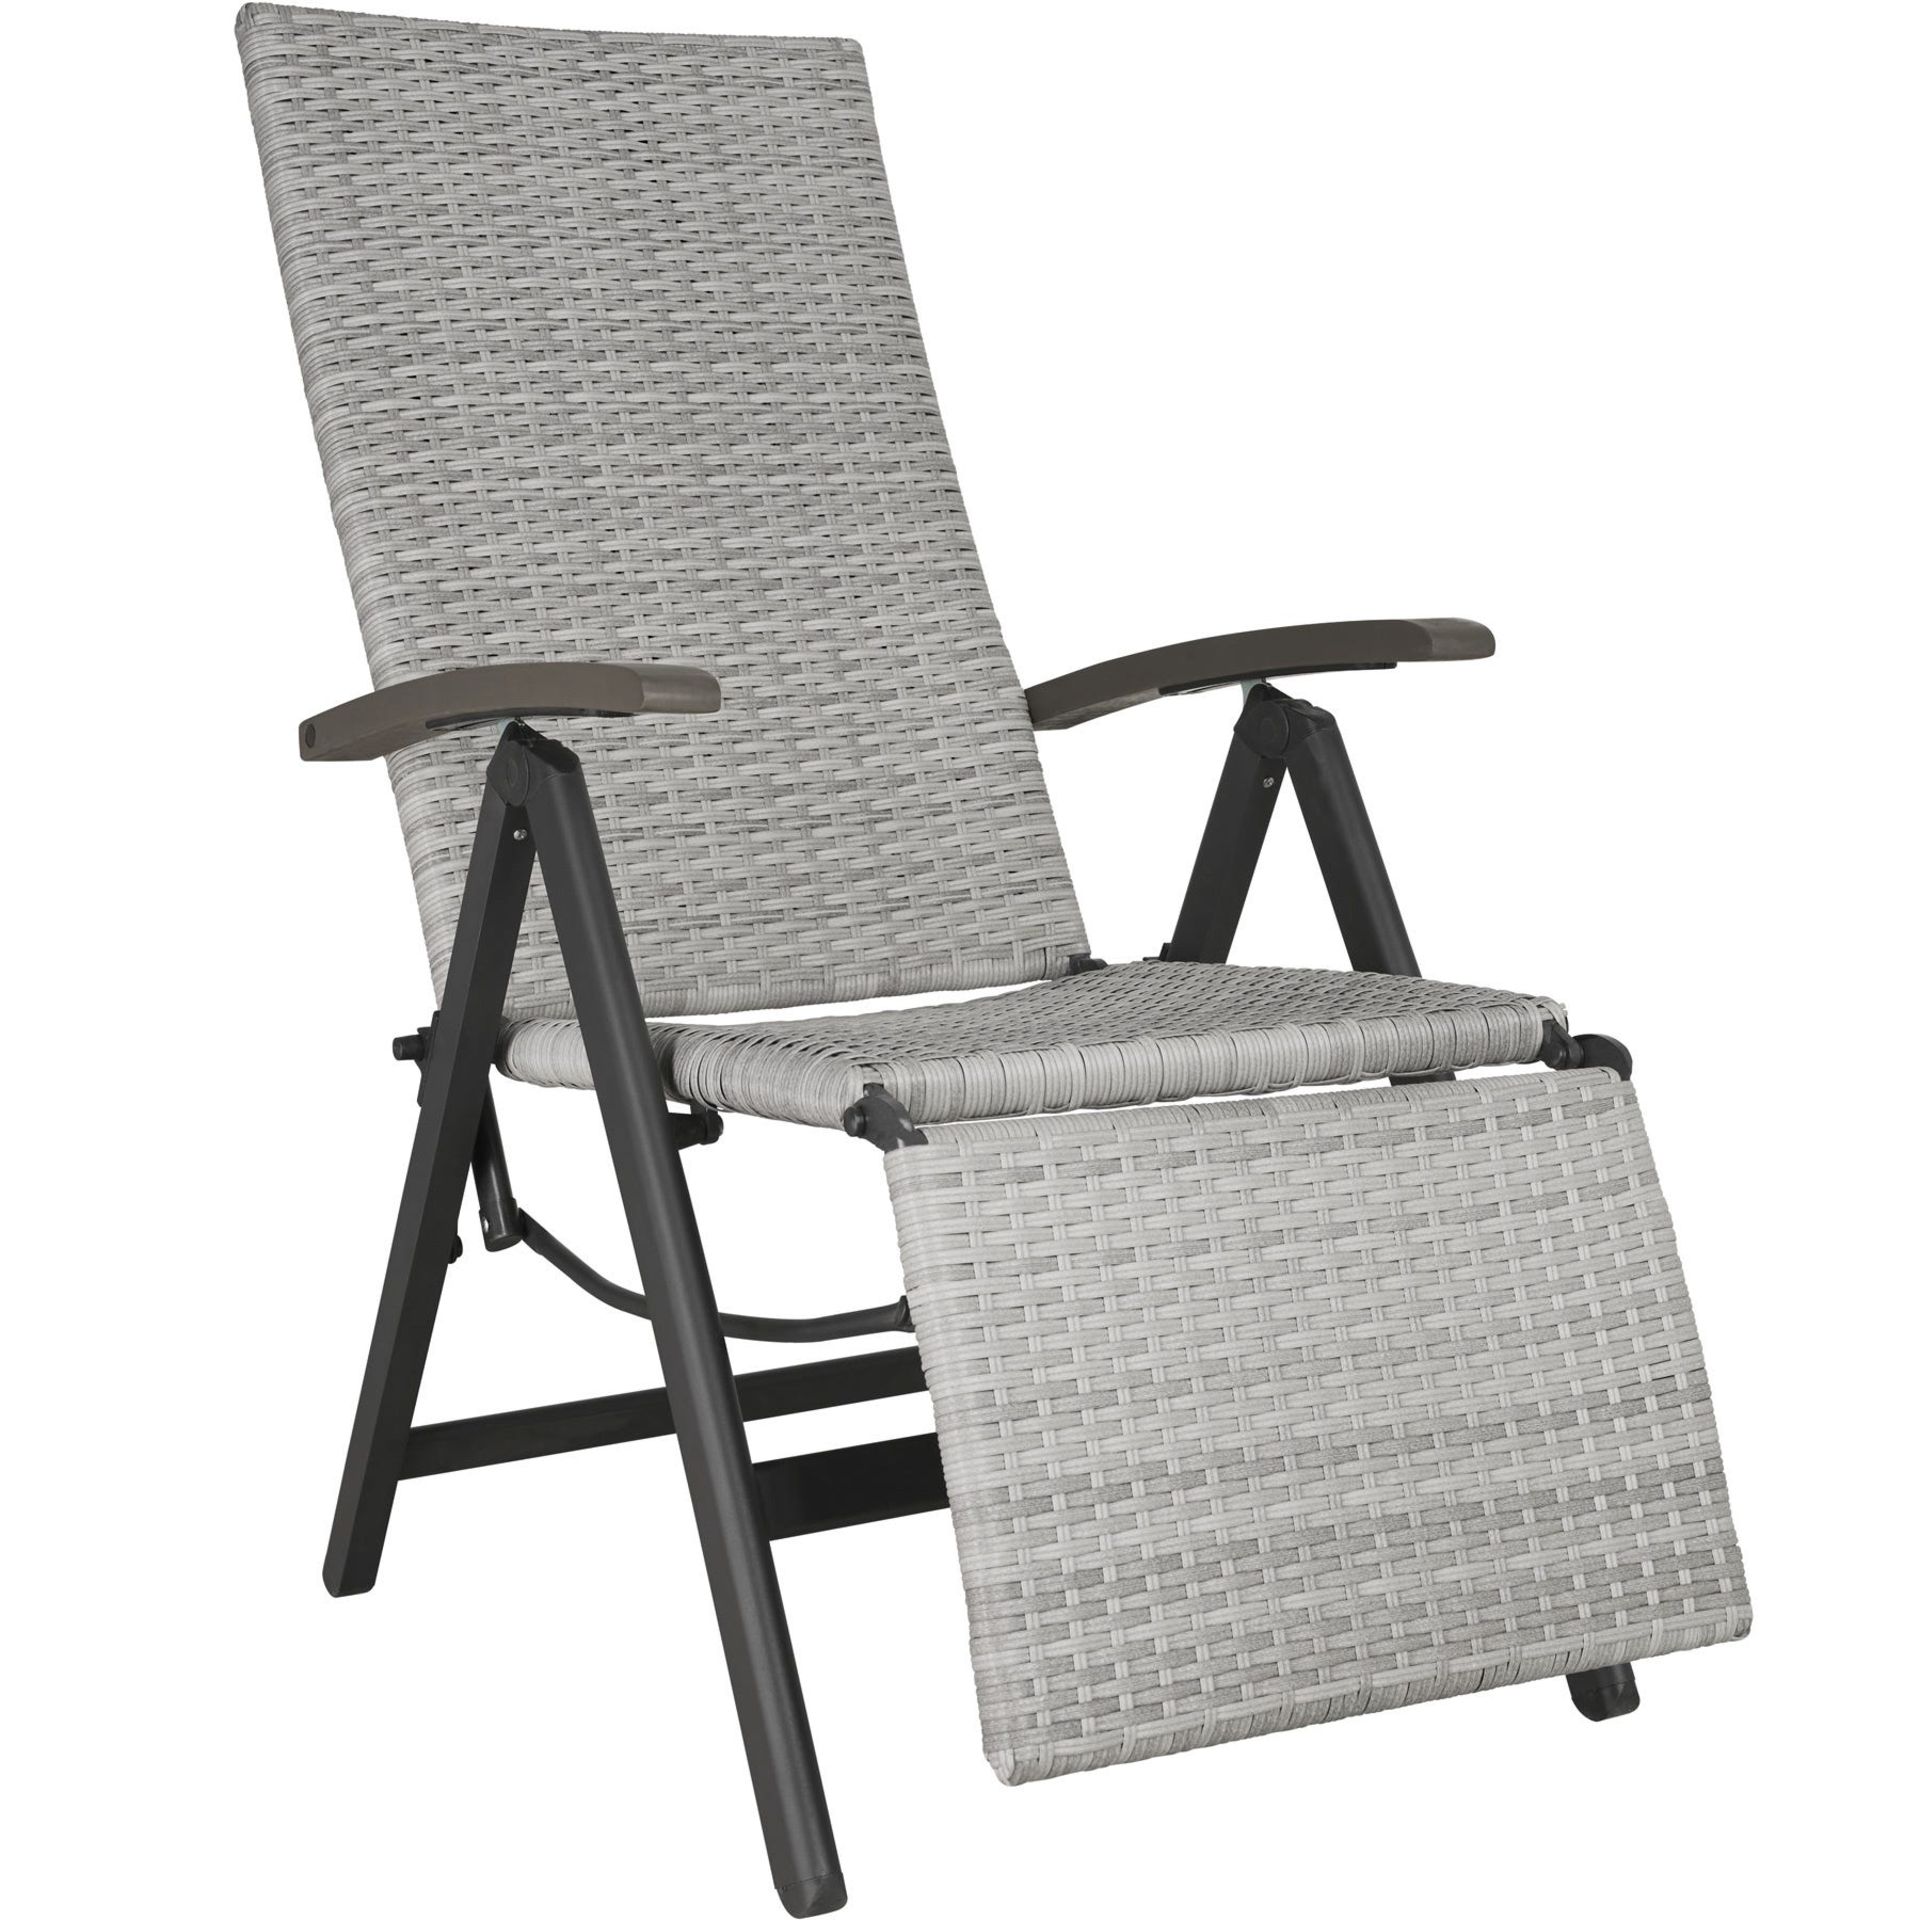 Tectake - Reclining Garden Chair With Footrest Grey - Boxed. RRP £113.99 - Image 2 of 2